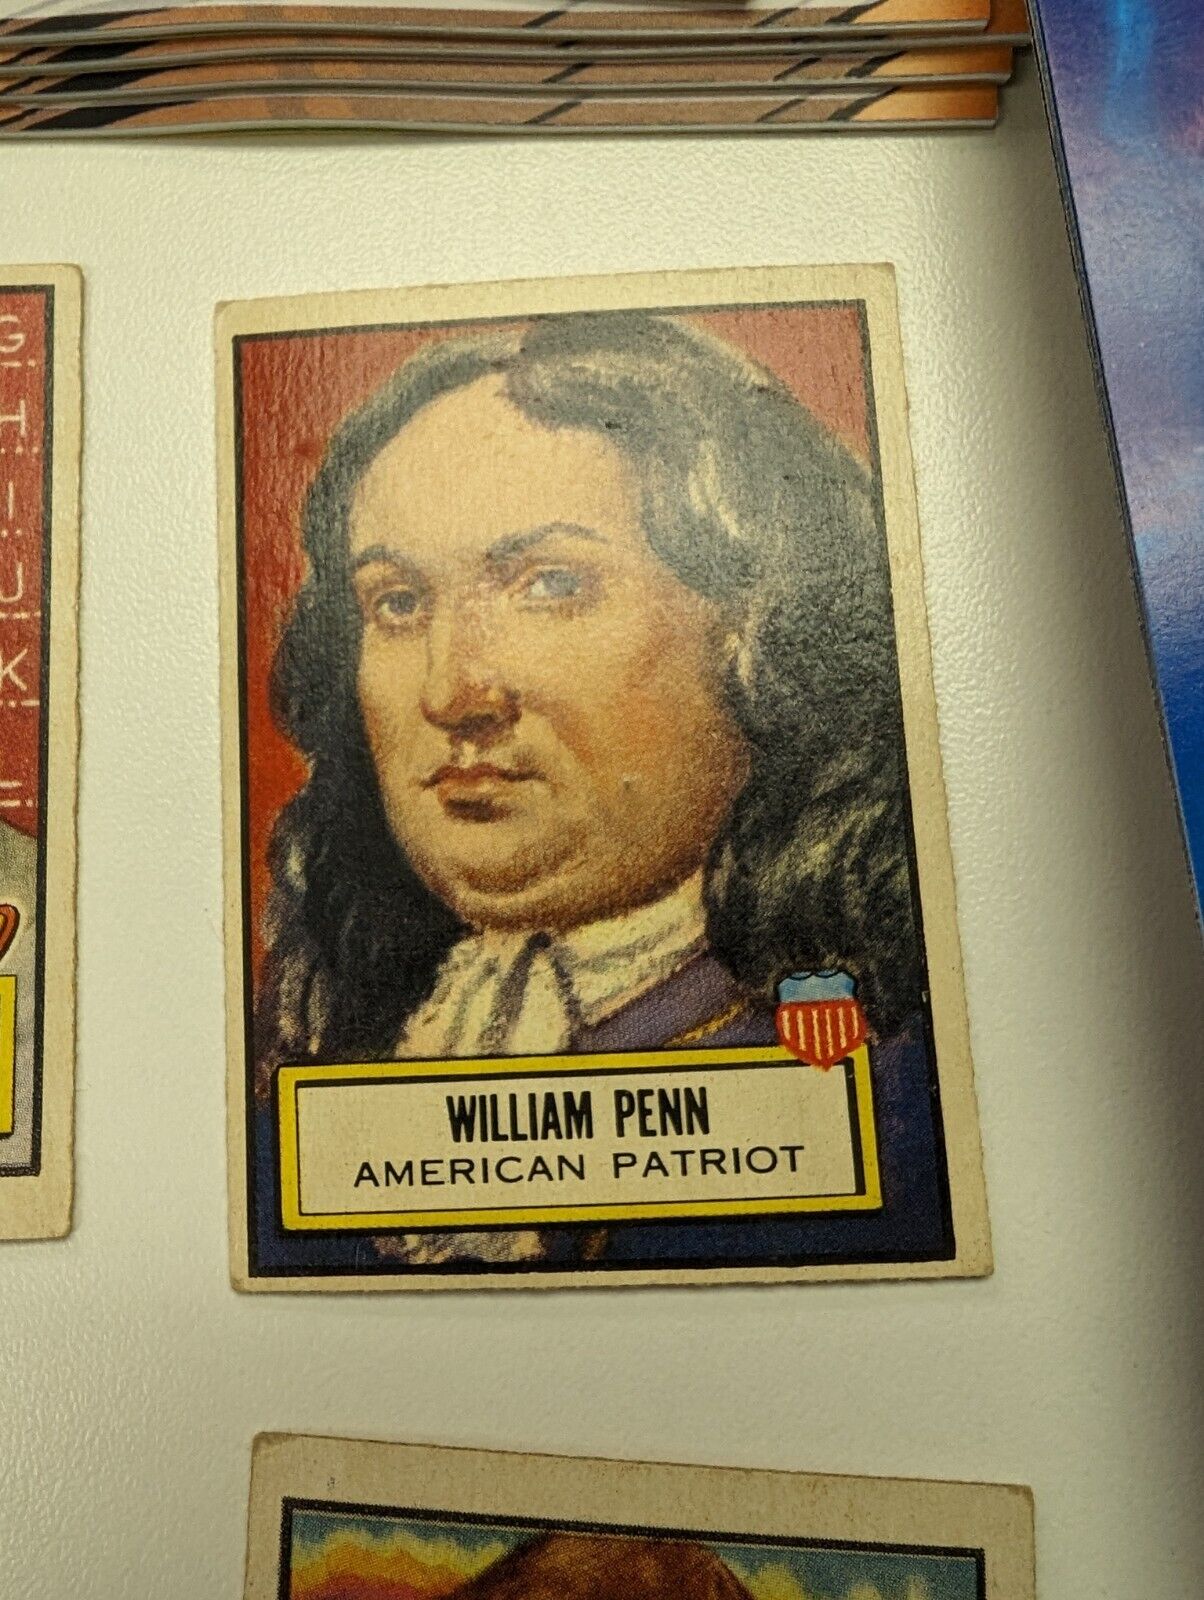 1952 Topps Look n See William Penn card #77 EX condition No creases